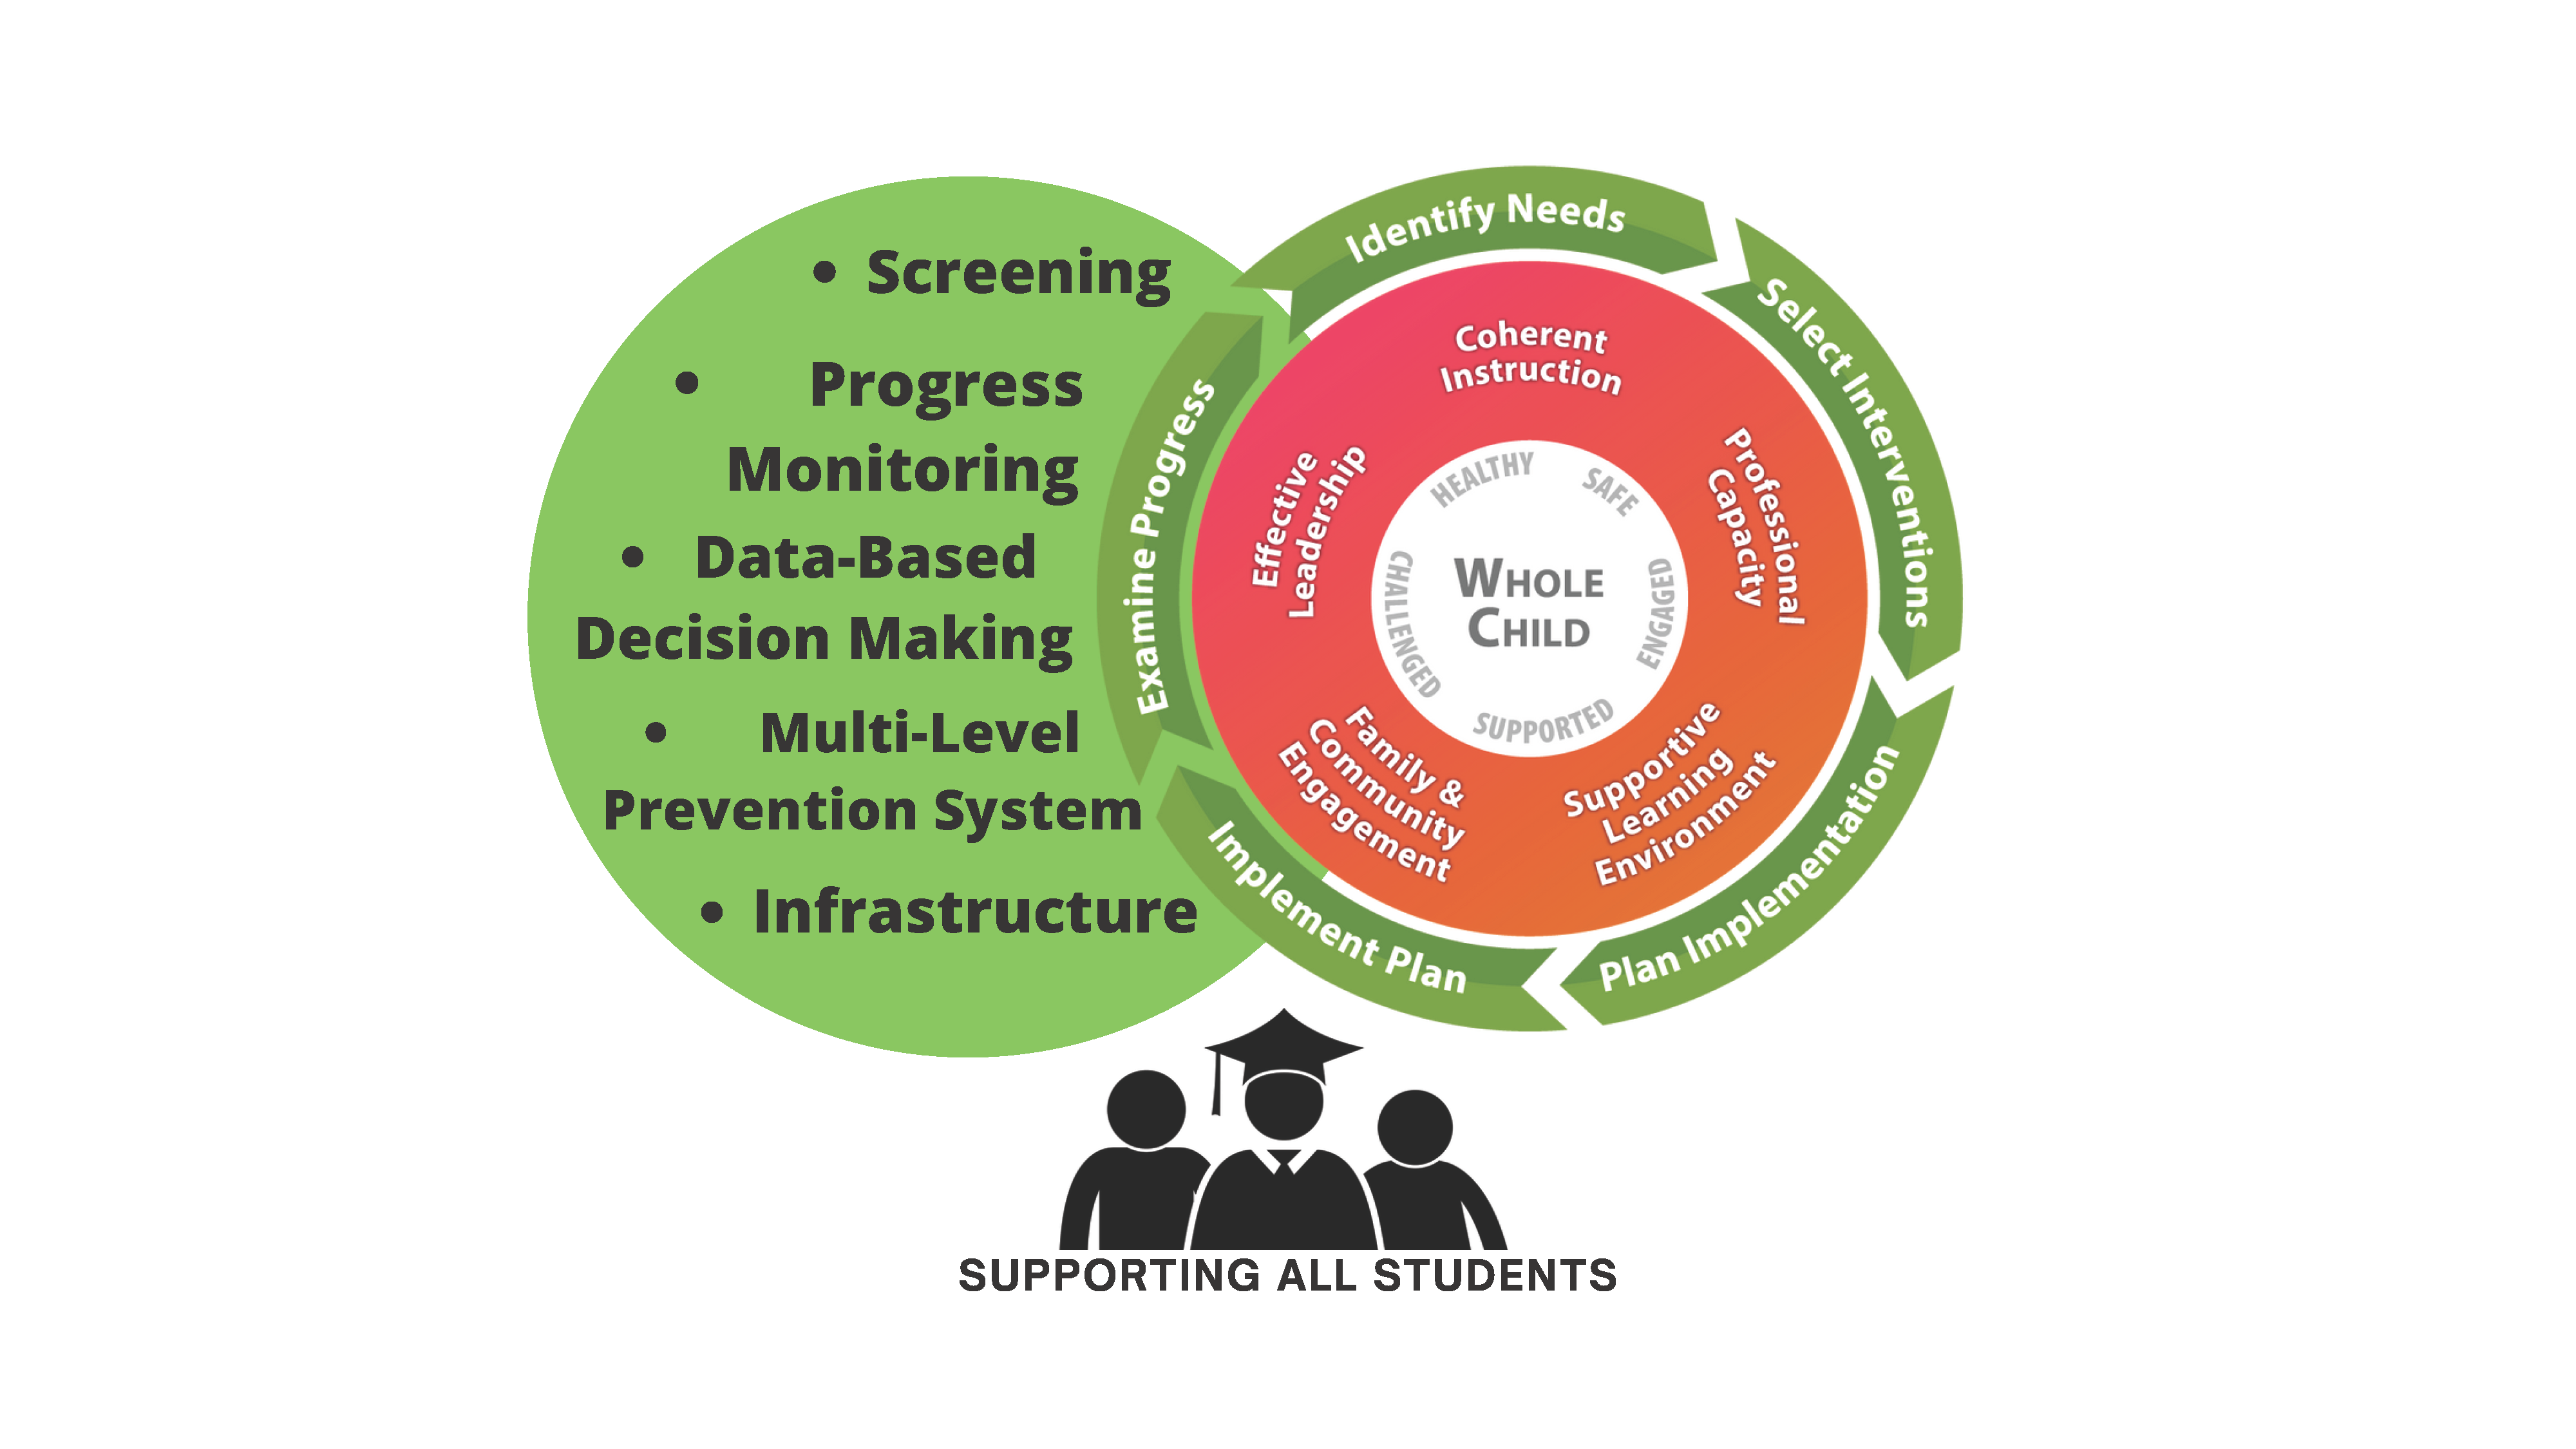 Supporting all students image